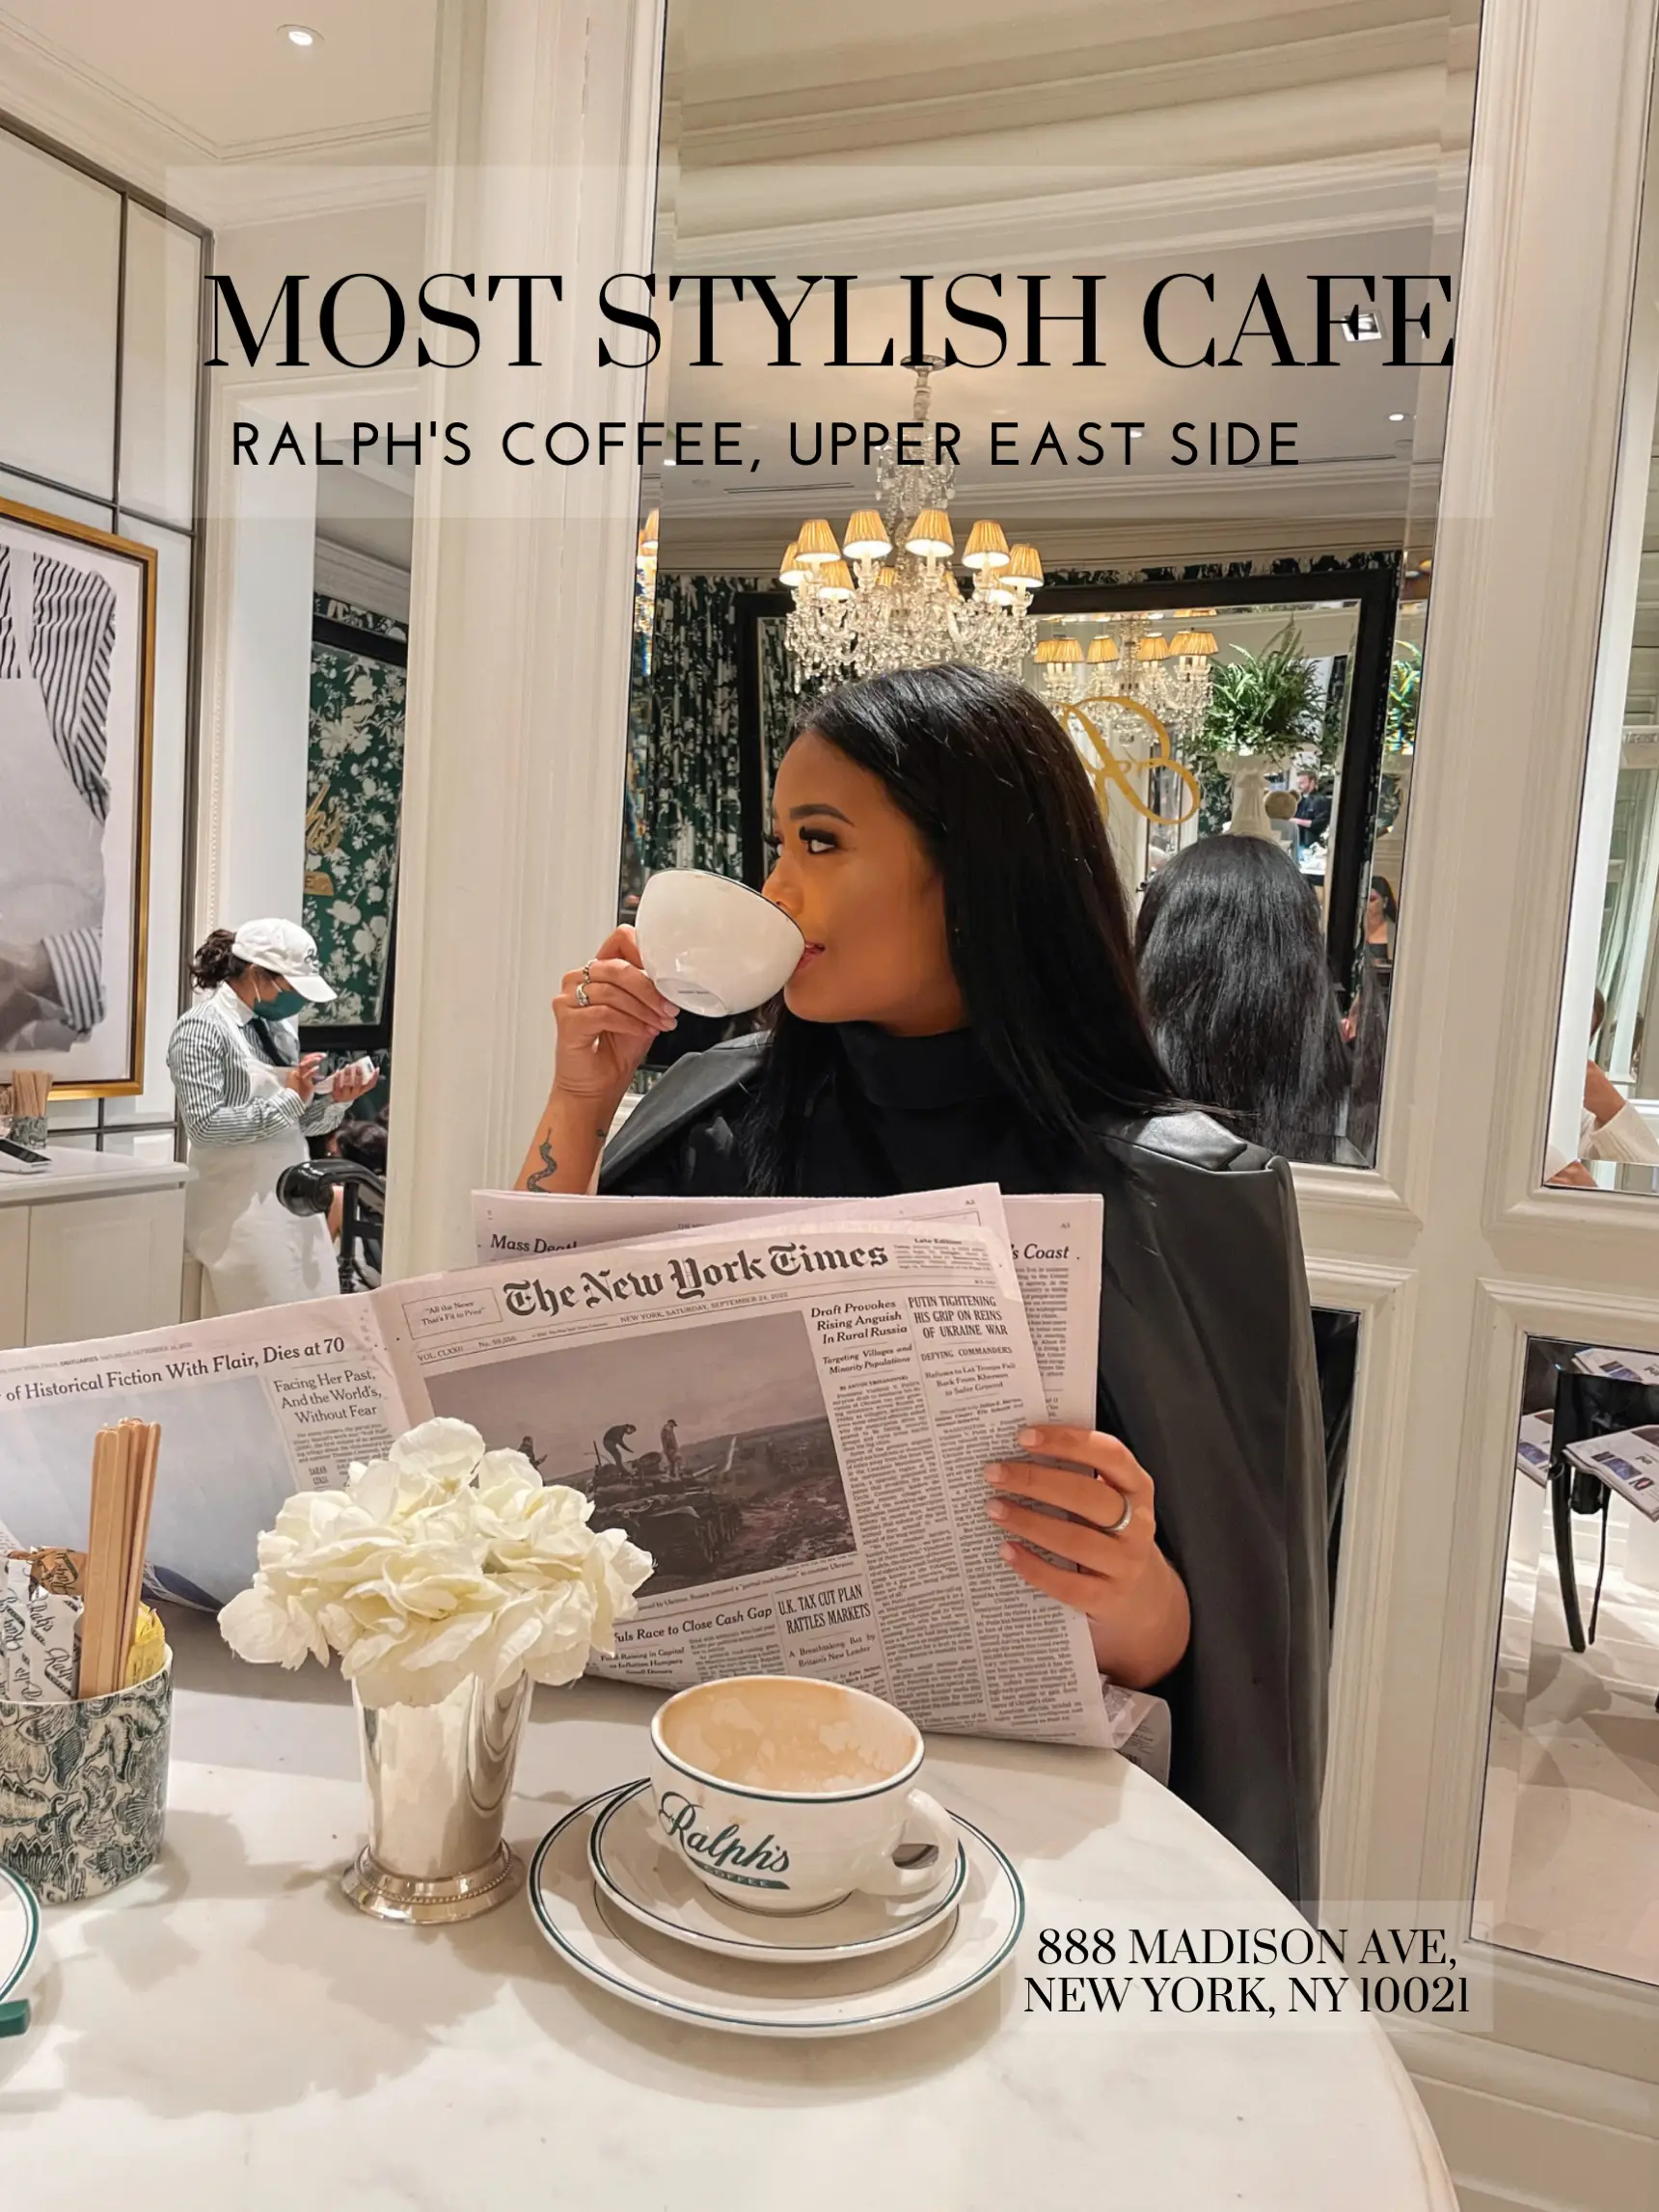  [NYC] MOST STYLISH CAFE ON THE UPPER EAST SIDE ✨'s images